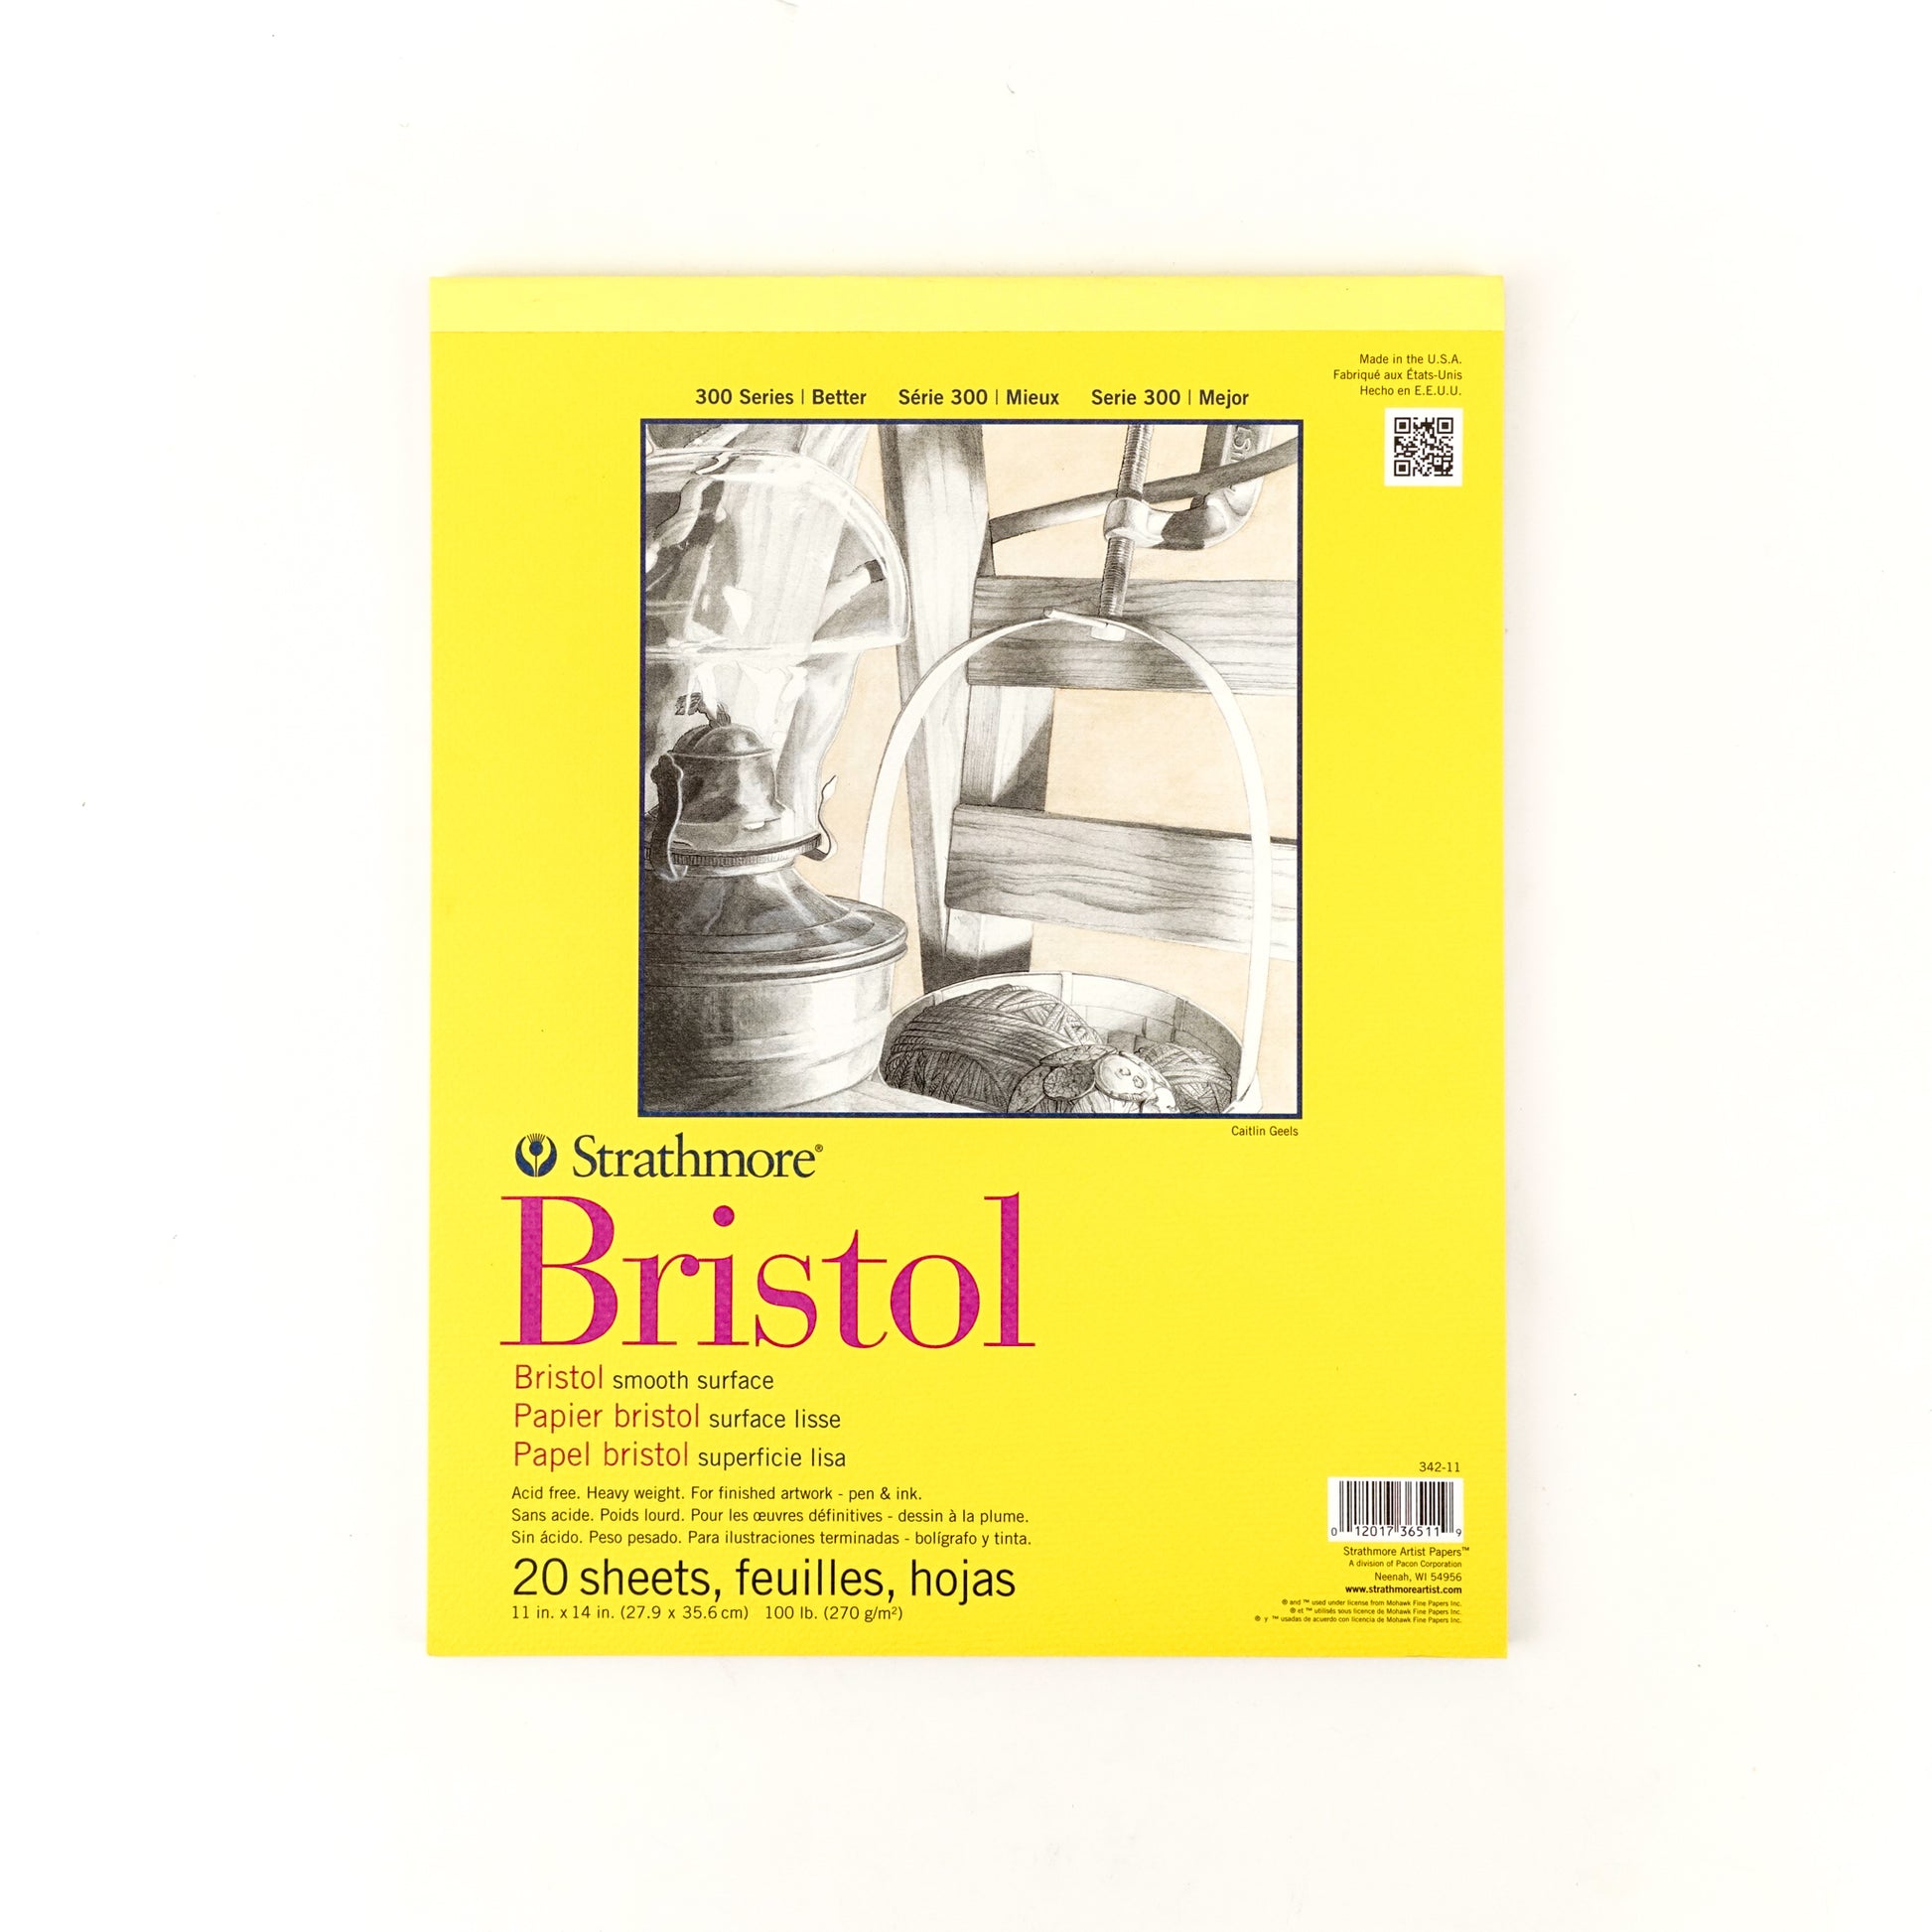 Strathmore 300 Series Bristol Paper Pad - Smooth Surface - 11 x 14 inches by Strathmore - K. A. Artist Shop